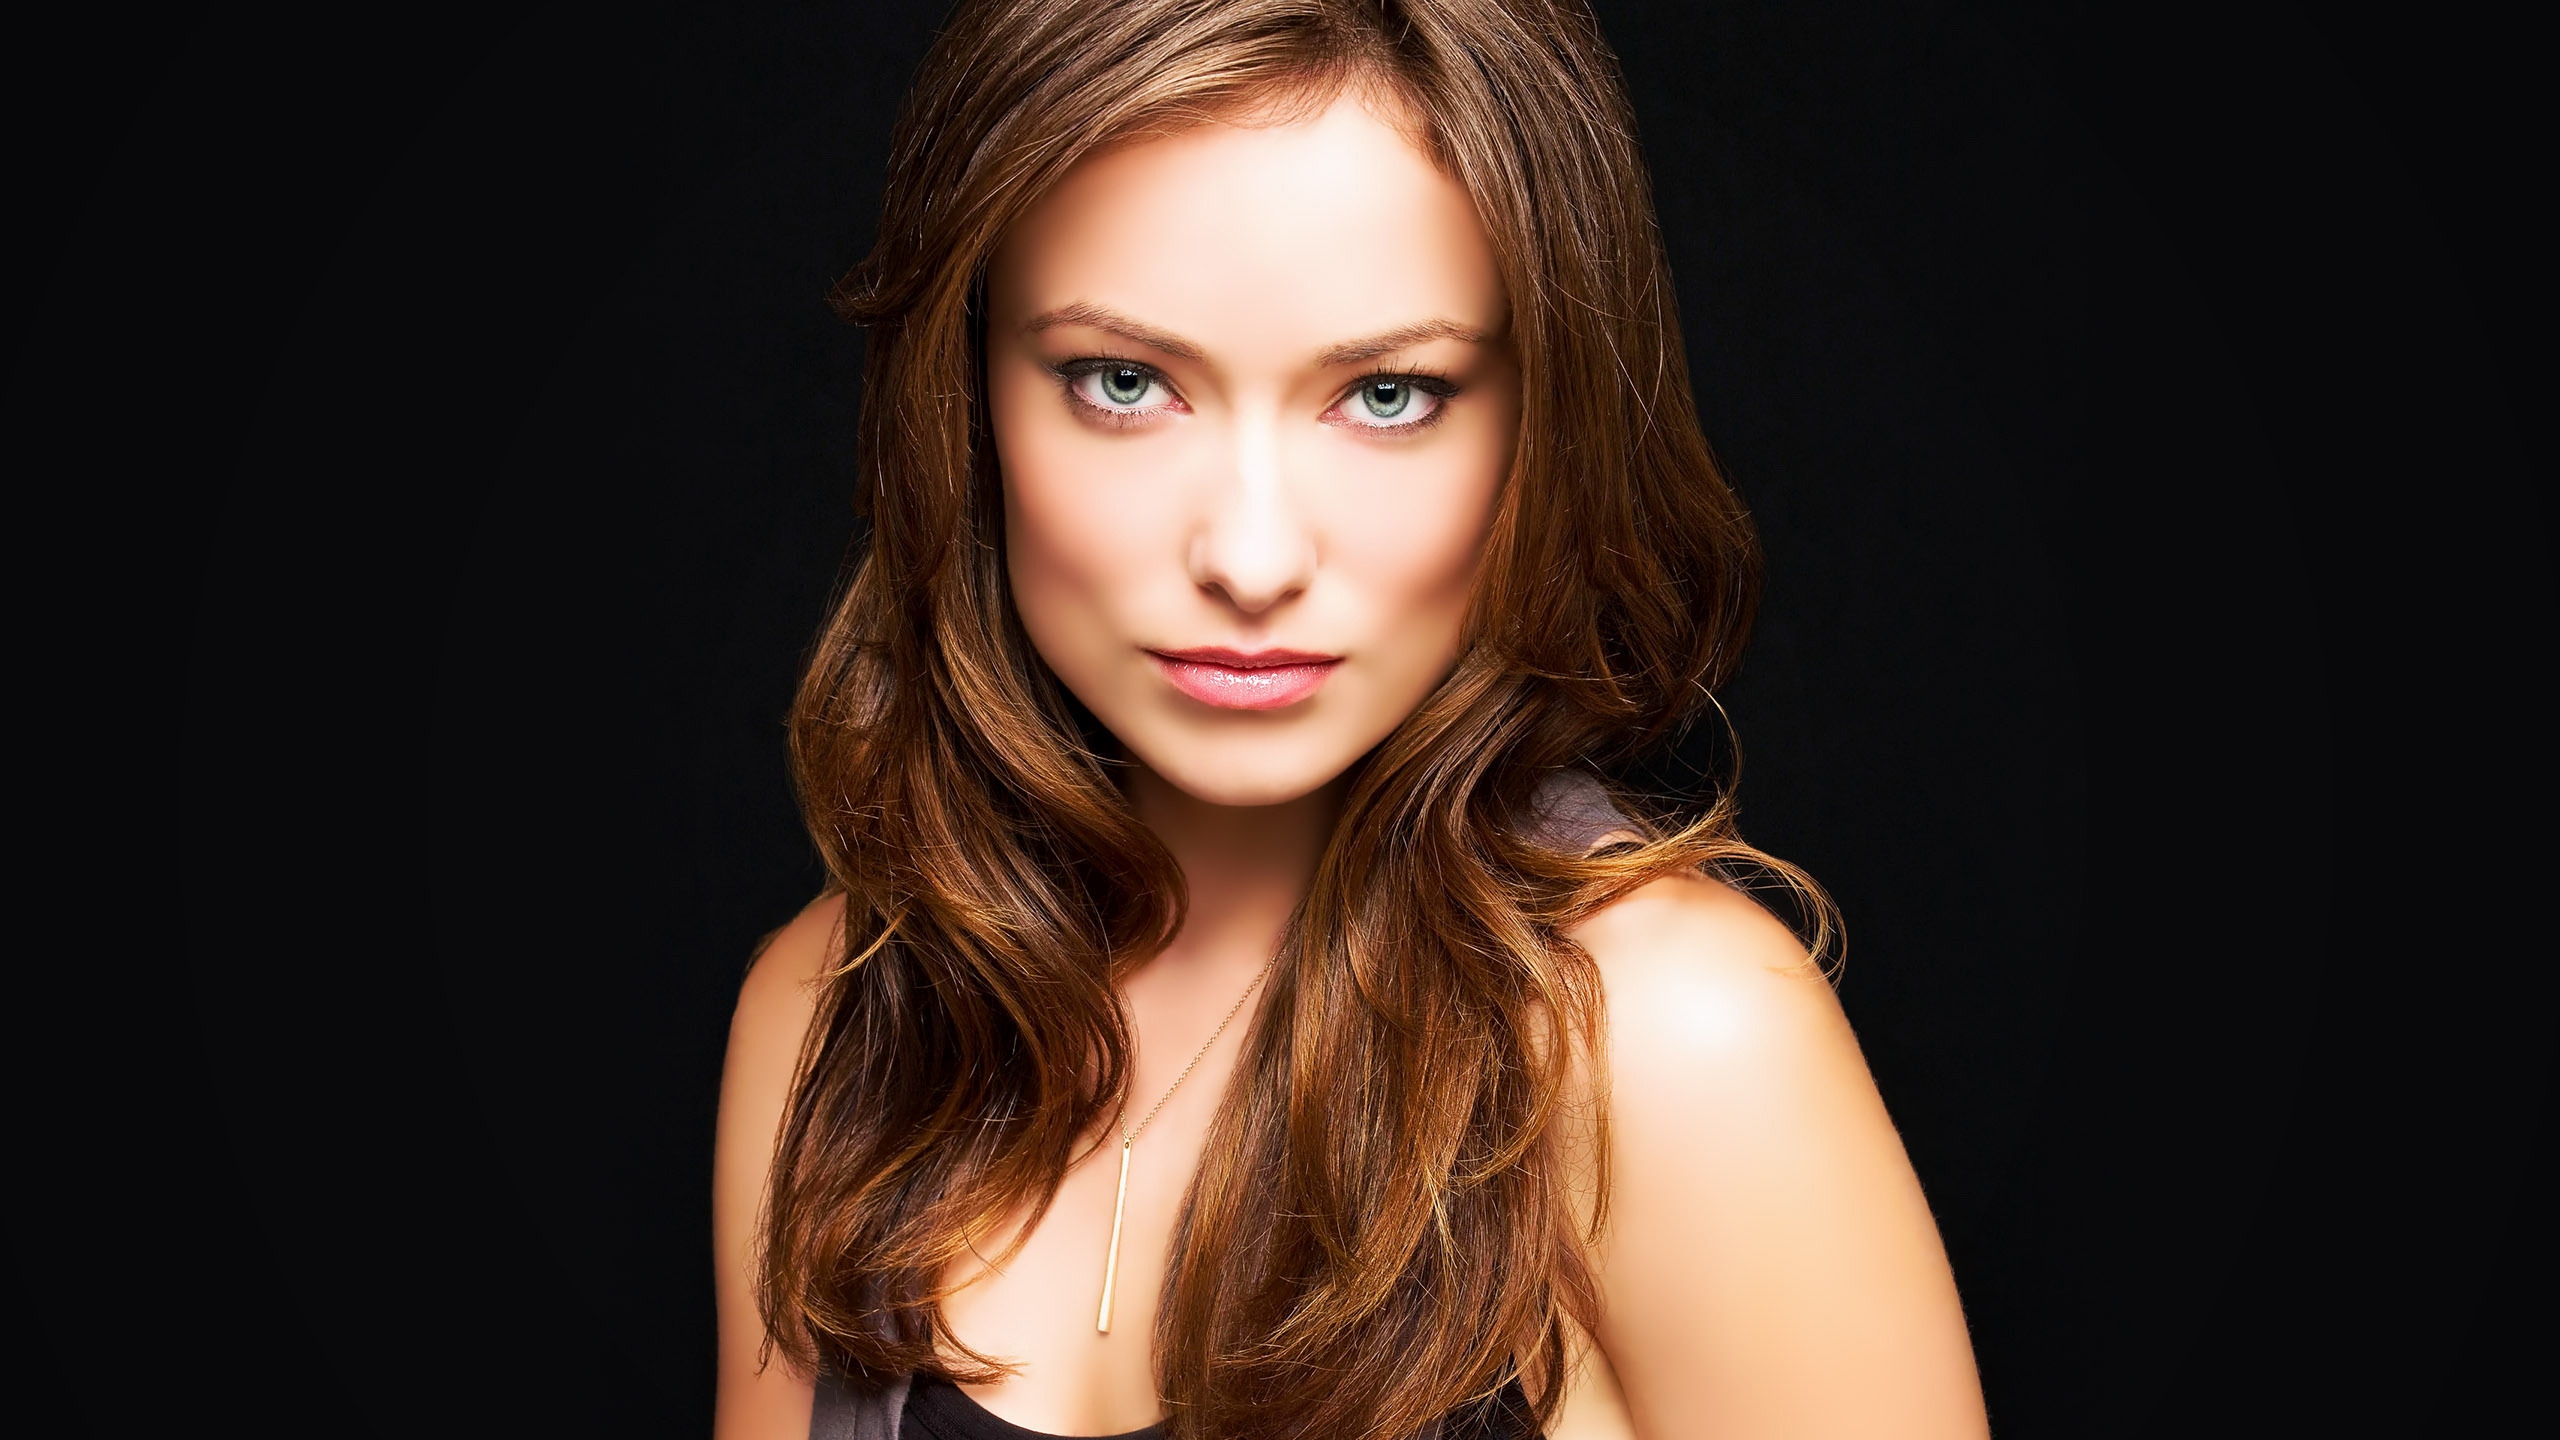 Olivia Wilde Look for 2560x1440 HDTV resolution